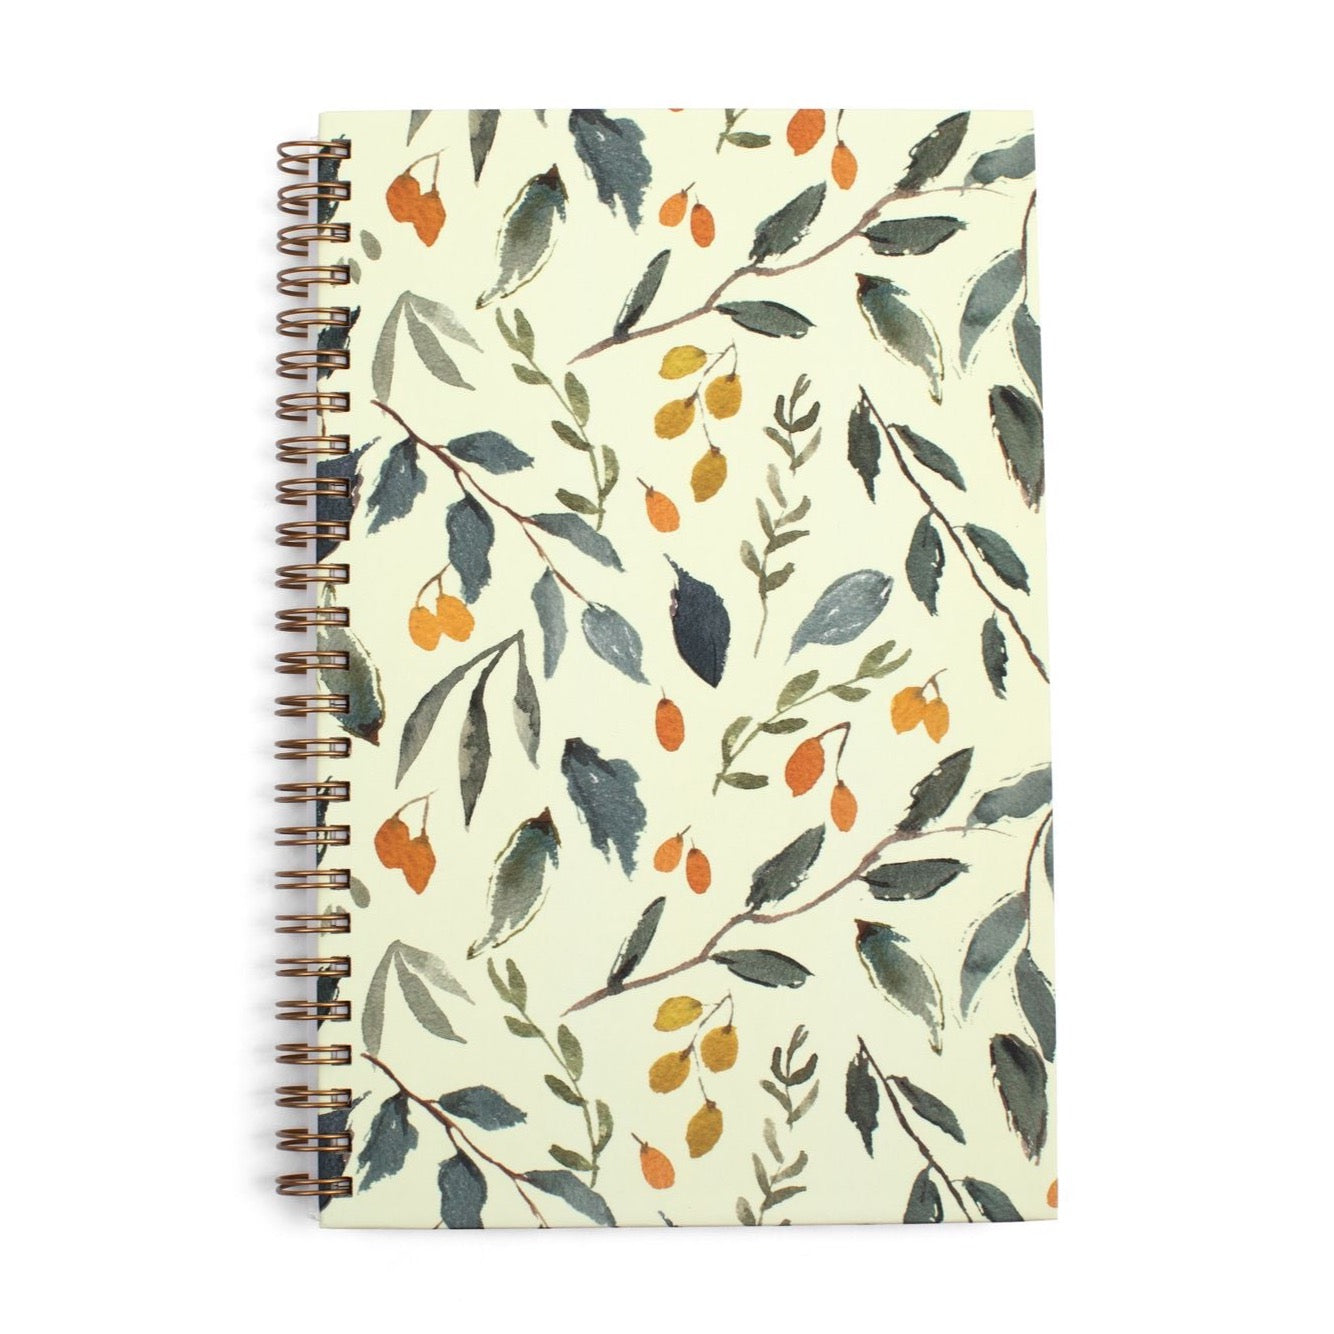 Falling Leaves Hard Cover Spiral Notebook